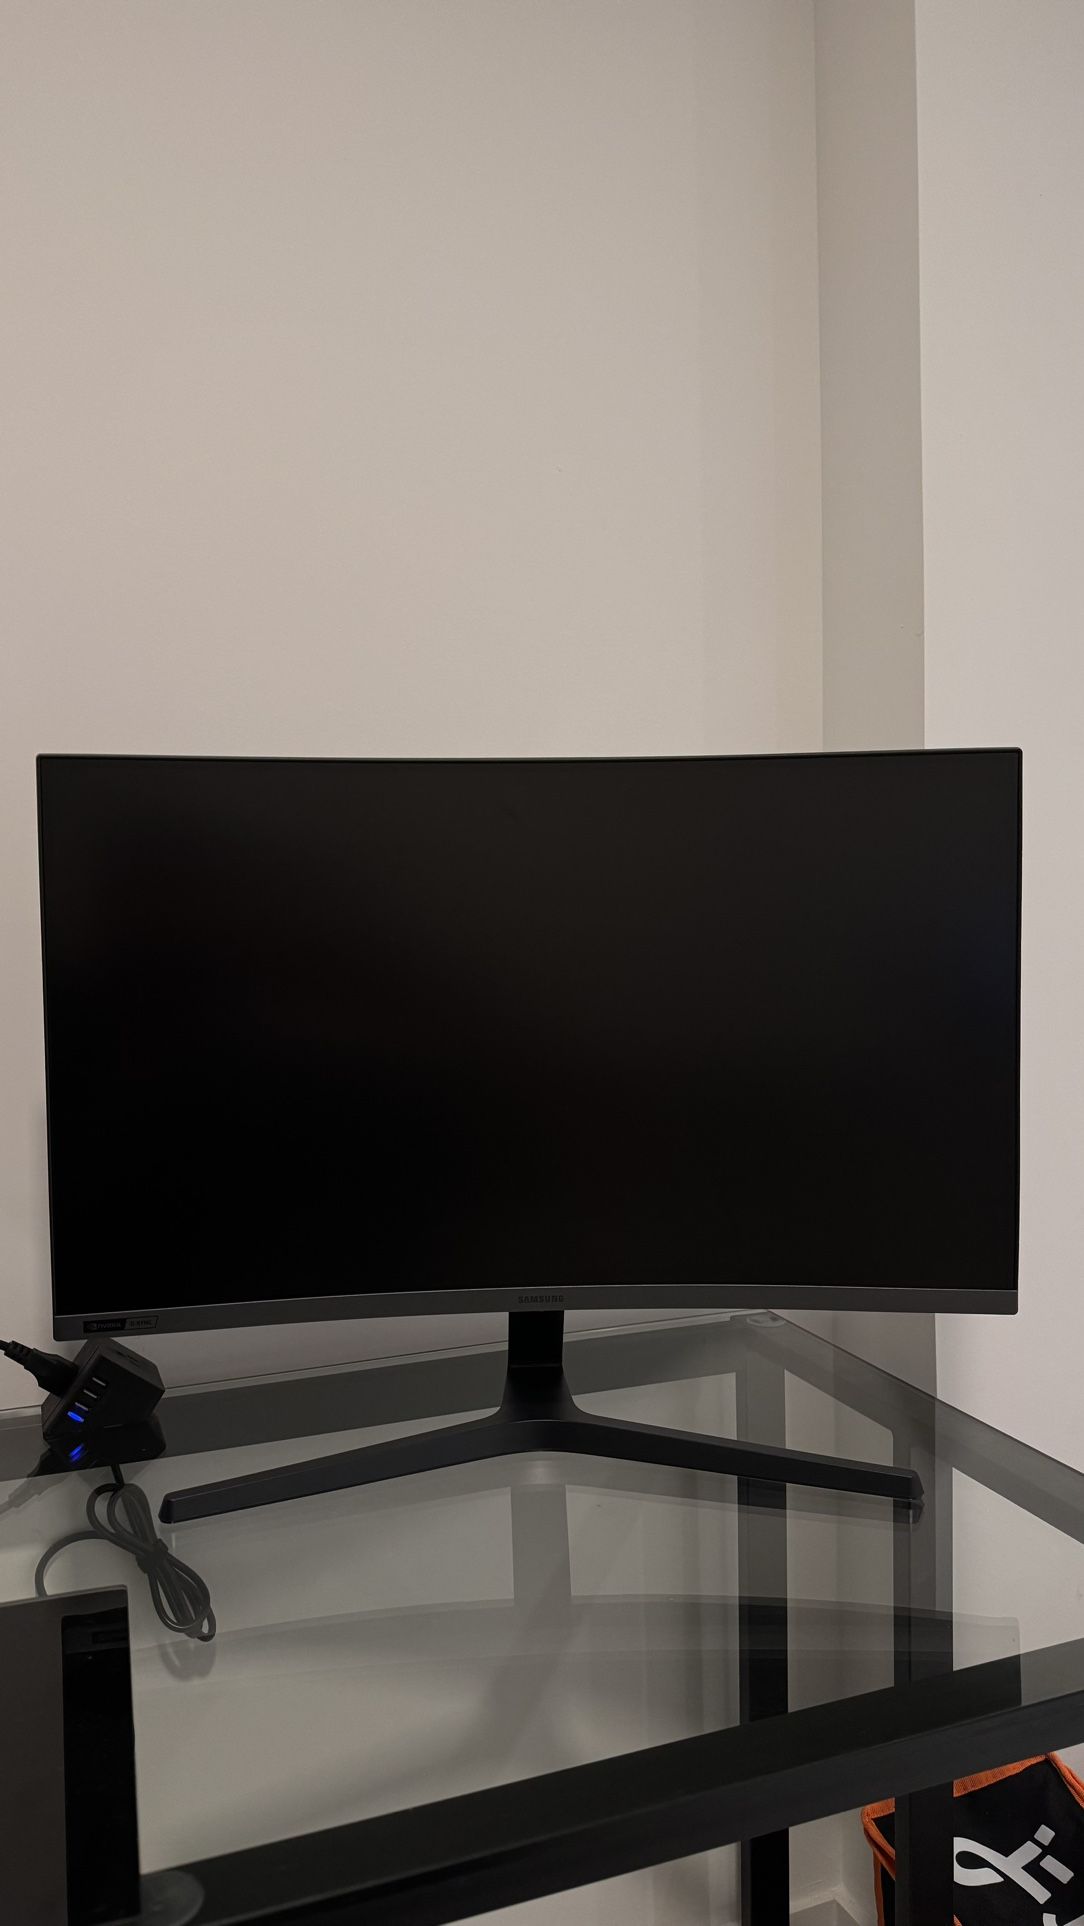 Samsung 27-inch 240hz Curved Gaming Monitor 